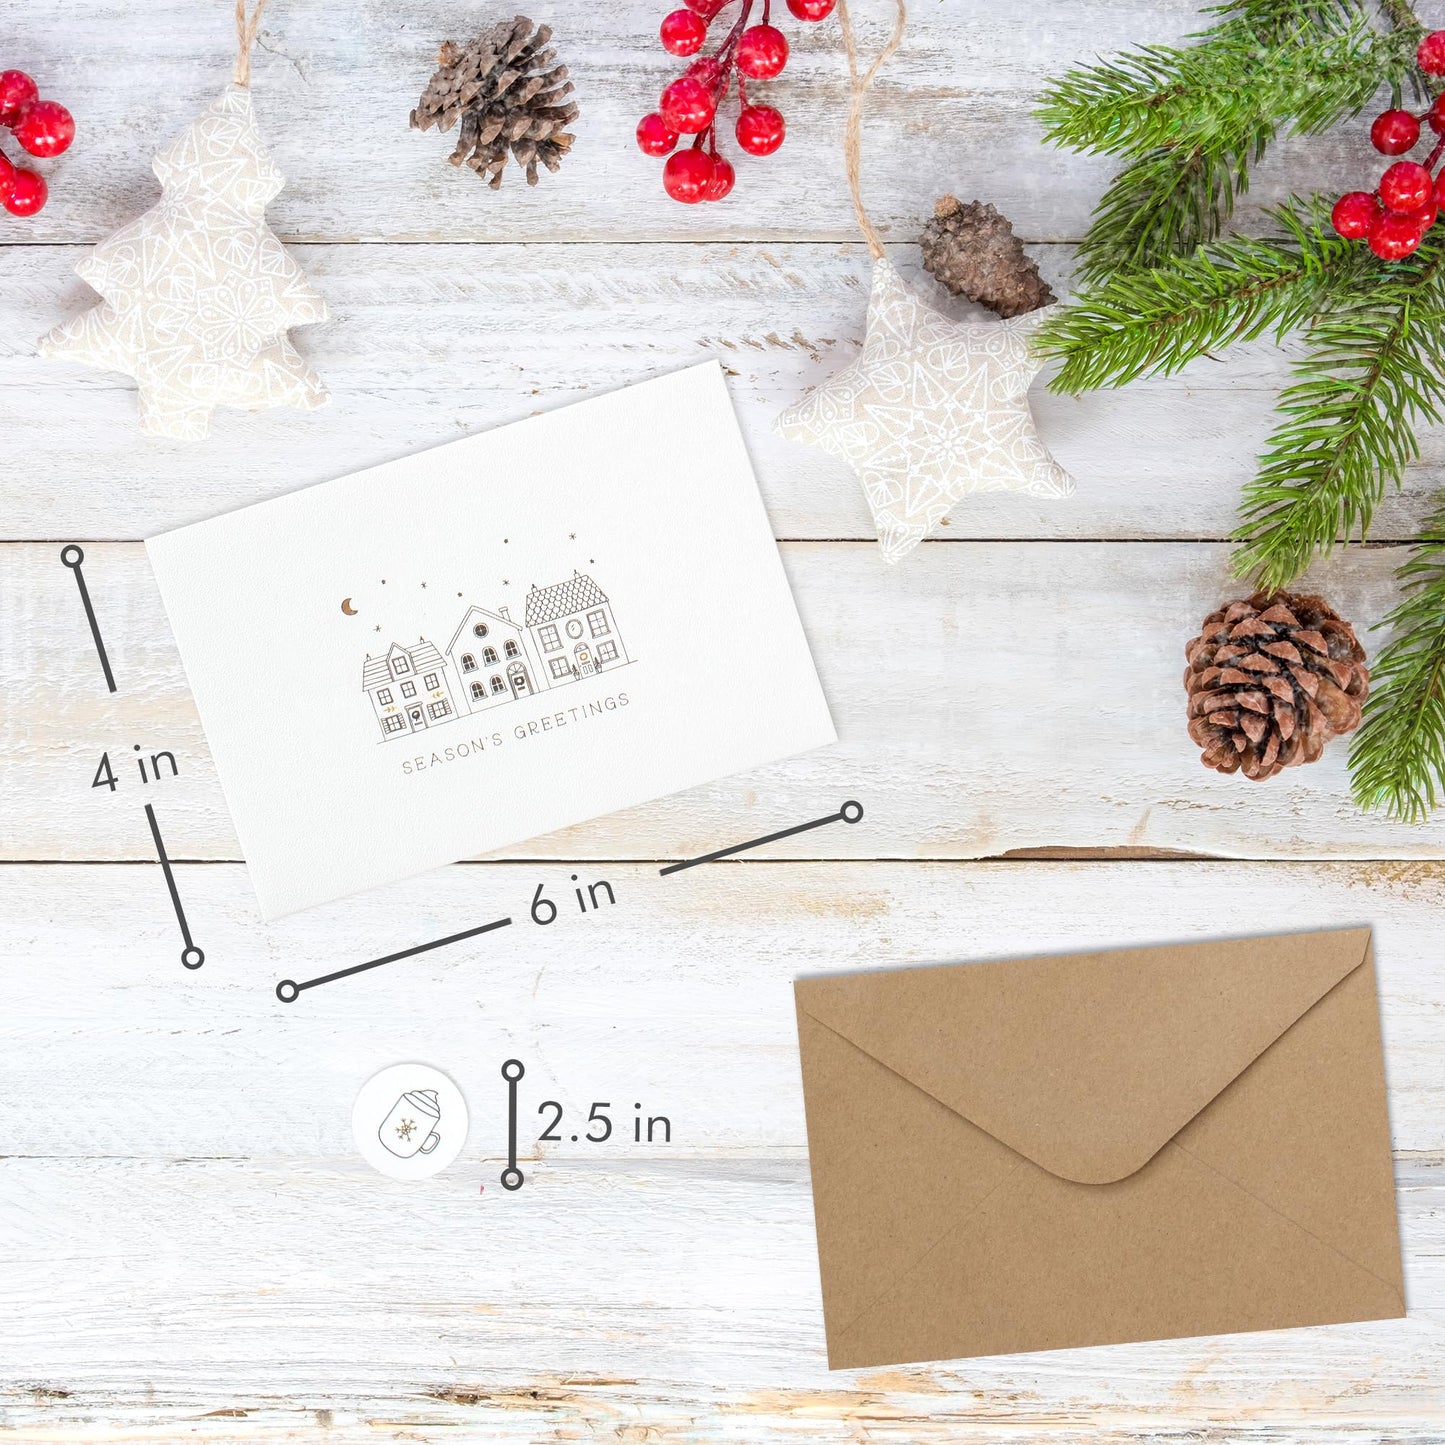 ZICOTO Beautiful Doodle Christmas Cards Set of 20 - Incl. Bulk Envelopes, Matching Stickers And Storage Box - Perfect to Send Warm Holiday Wishes to Friends and Family